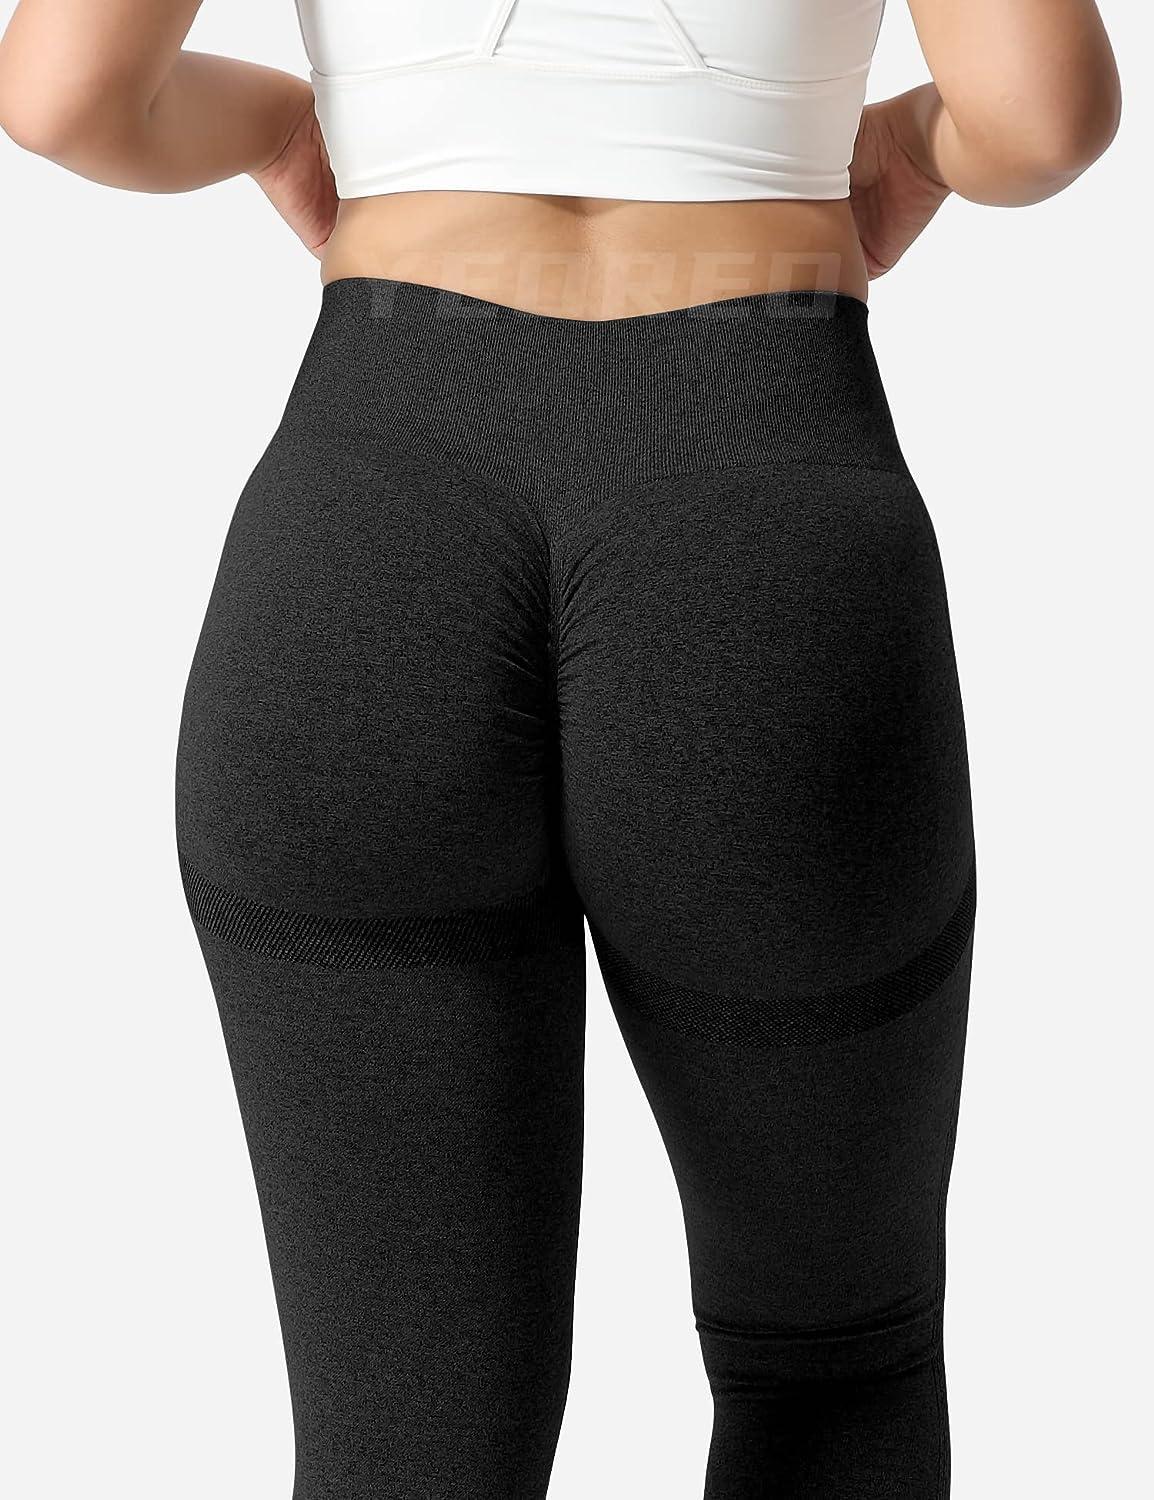  KOLAOYEP Women's High Waist Leggings Tummy Control Workout Butt  Lifting Ruched Yoga Pants Textured Stretchy Booty Tights Black : Clothing,  Shoes & Jewelry